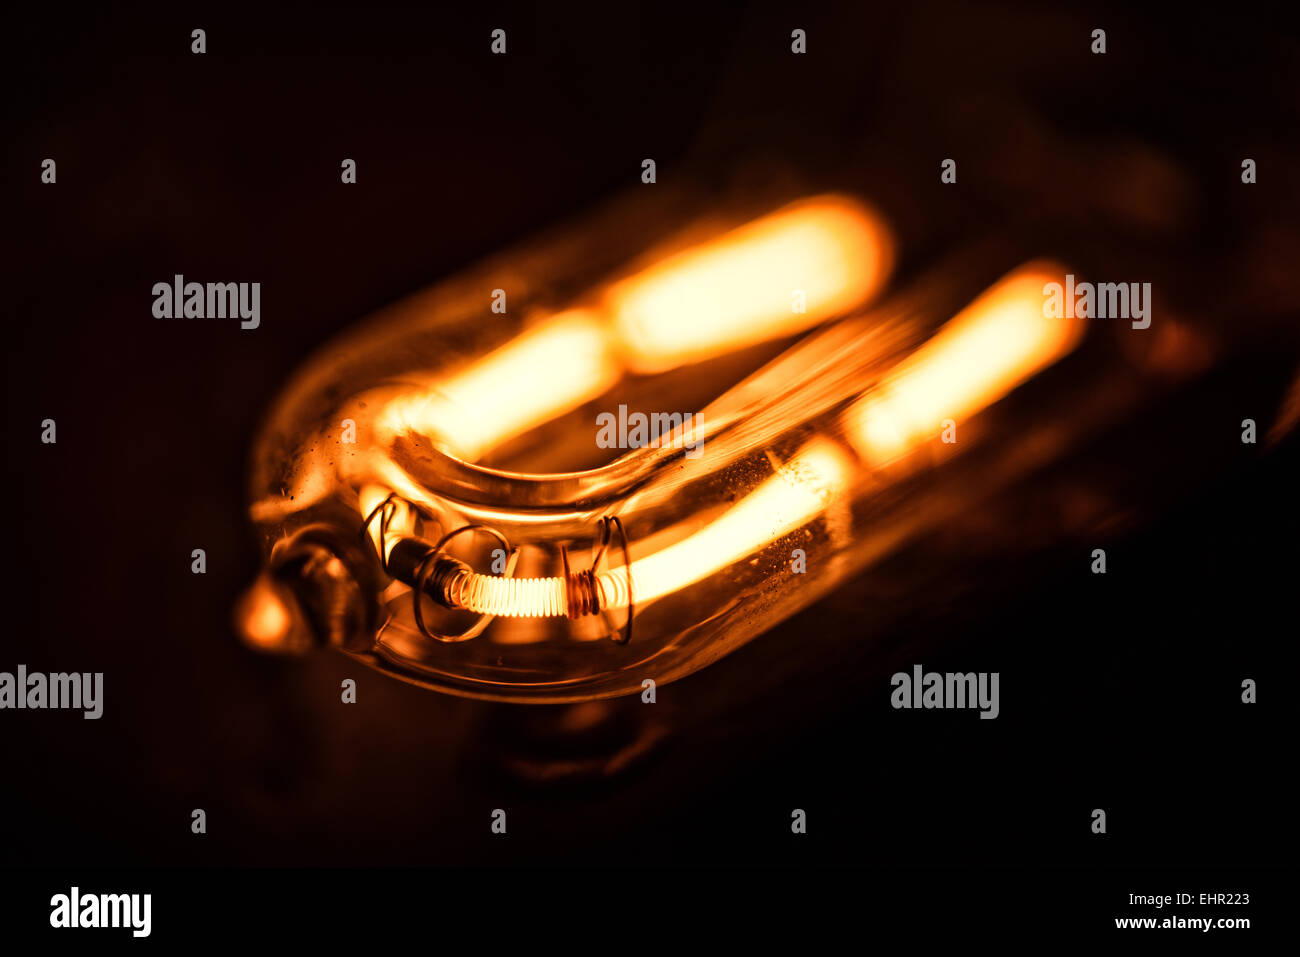 glowing filament of a 1000 quartz halogen bulb with flaked metal and heat damage to the reflector and heat dispenser Stock Photo